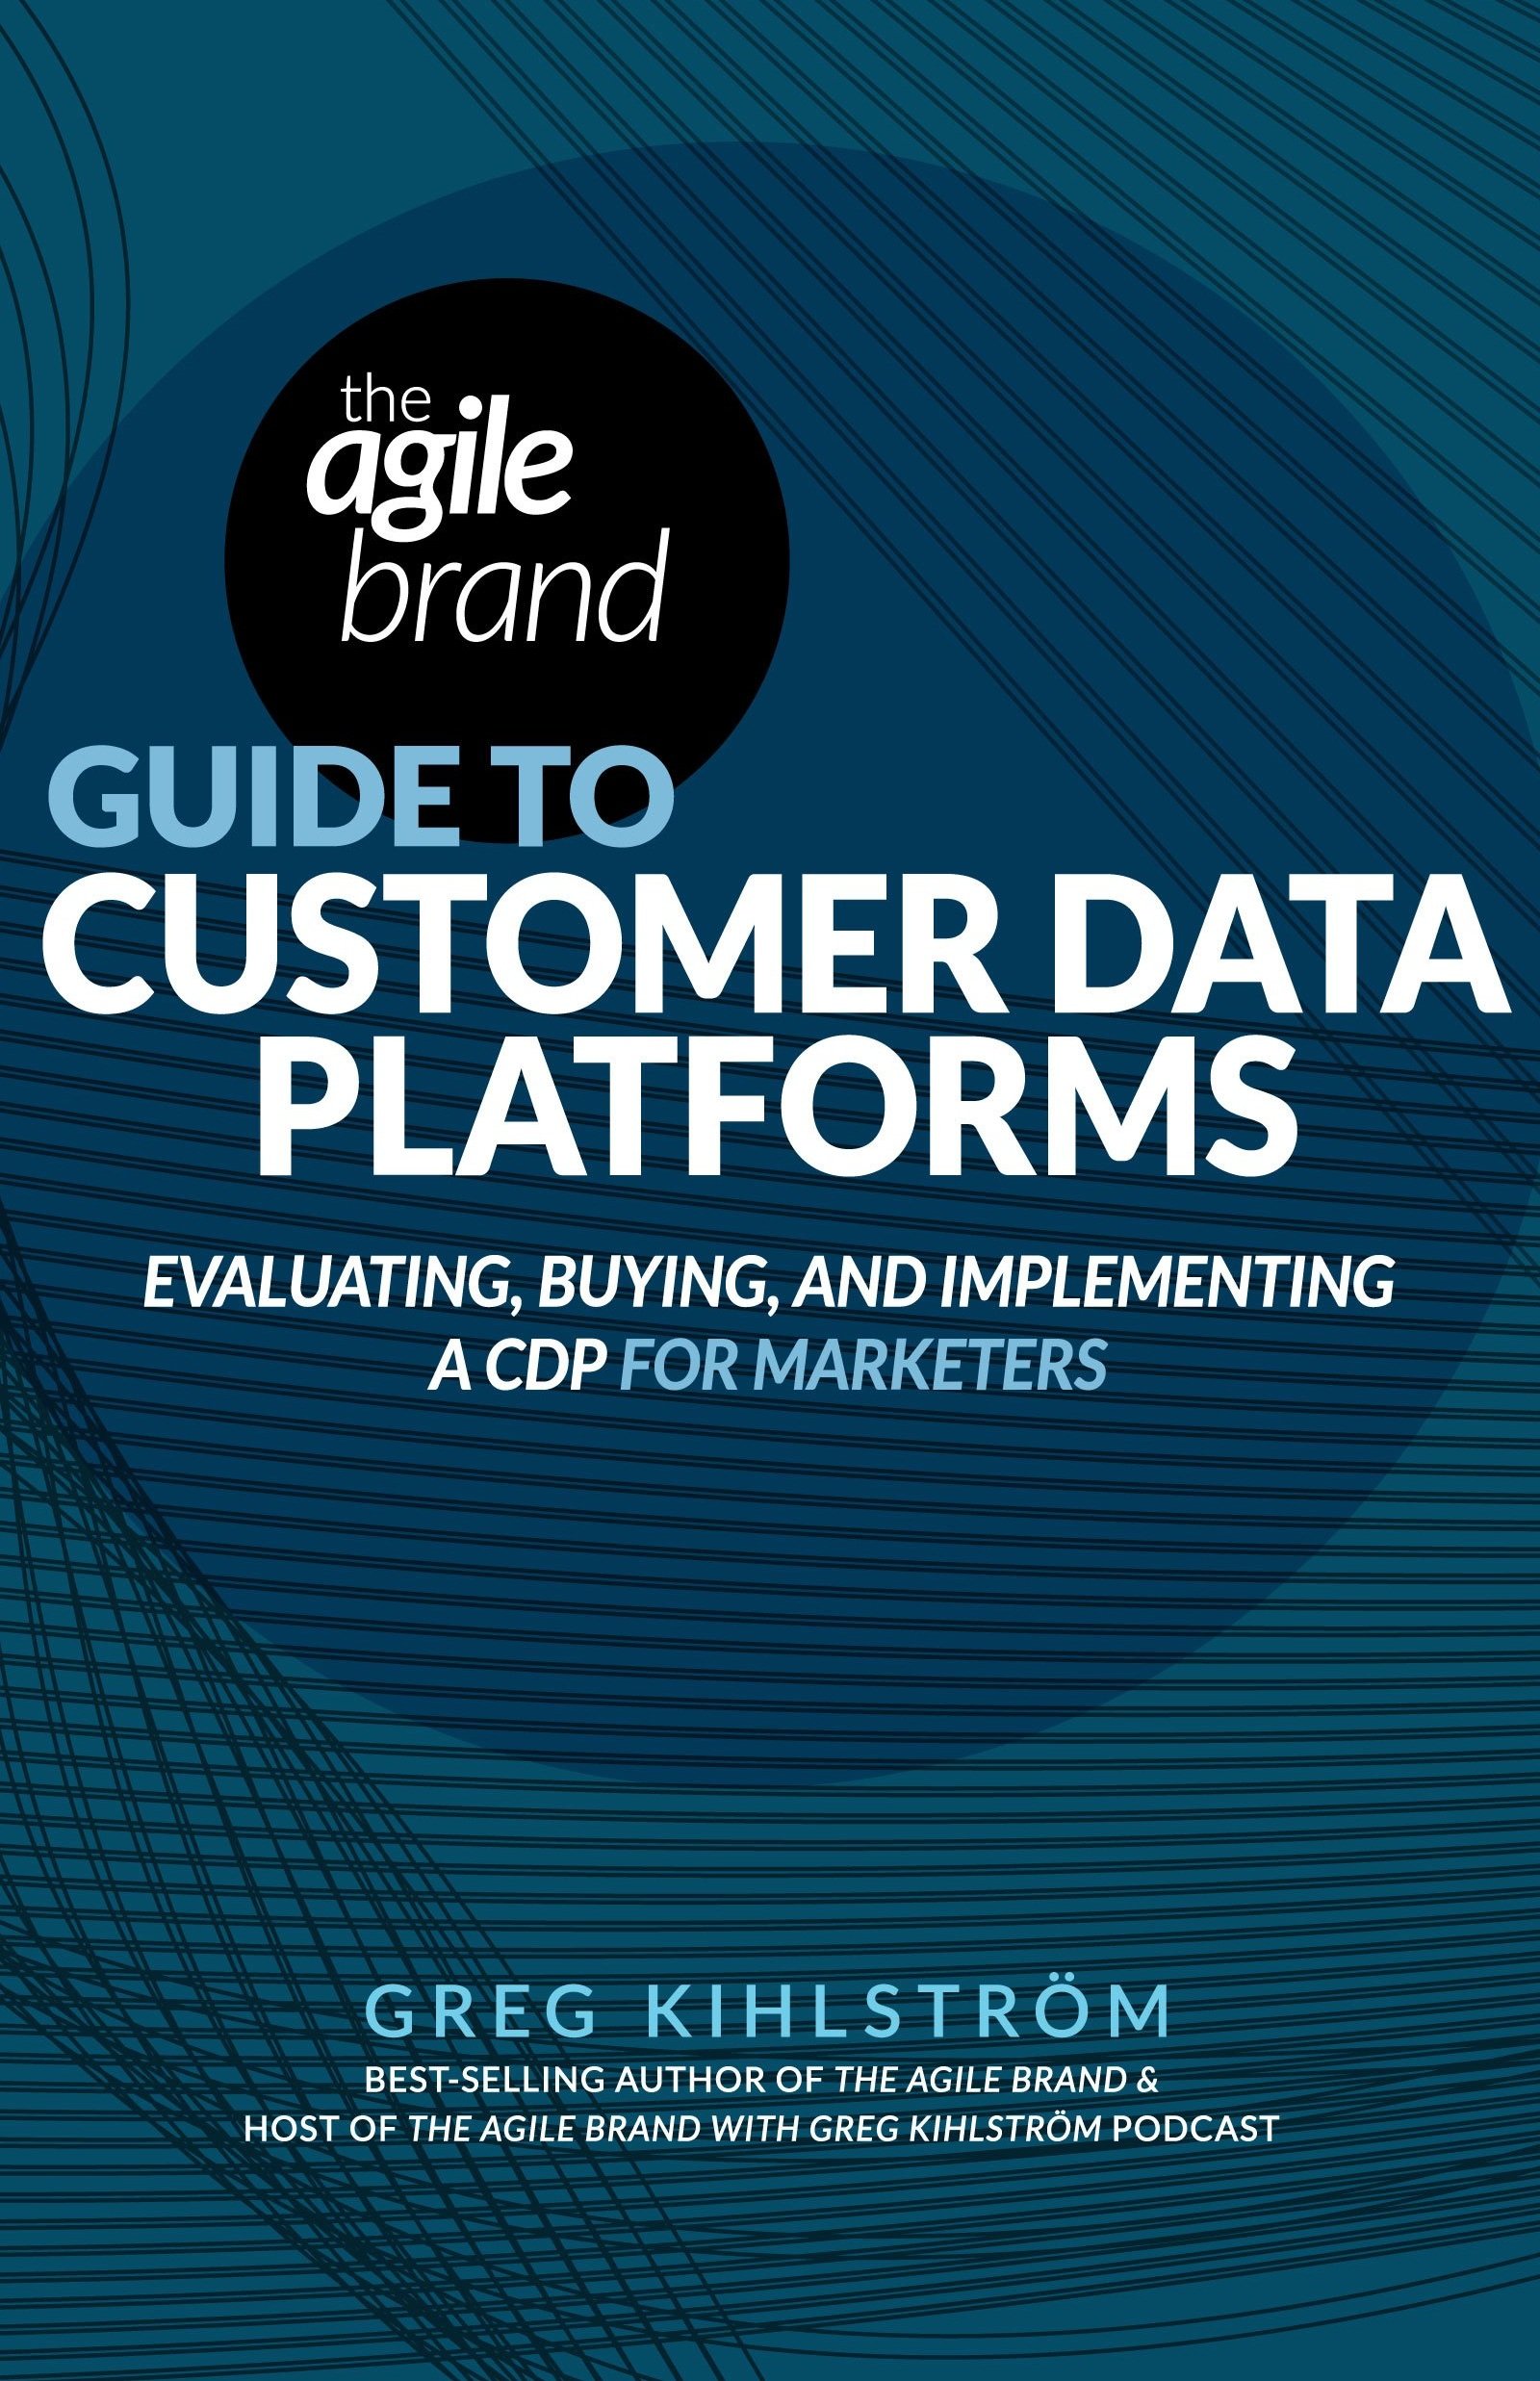 The Agile Brand Guide to Customer Data Platforms (Copy)